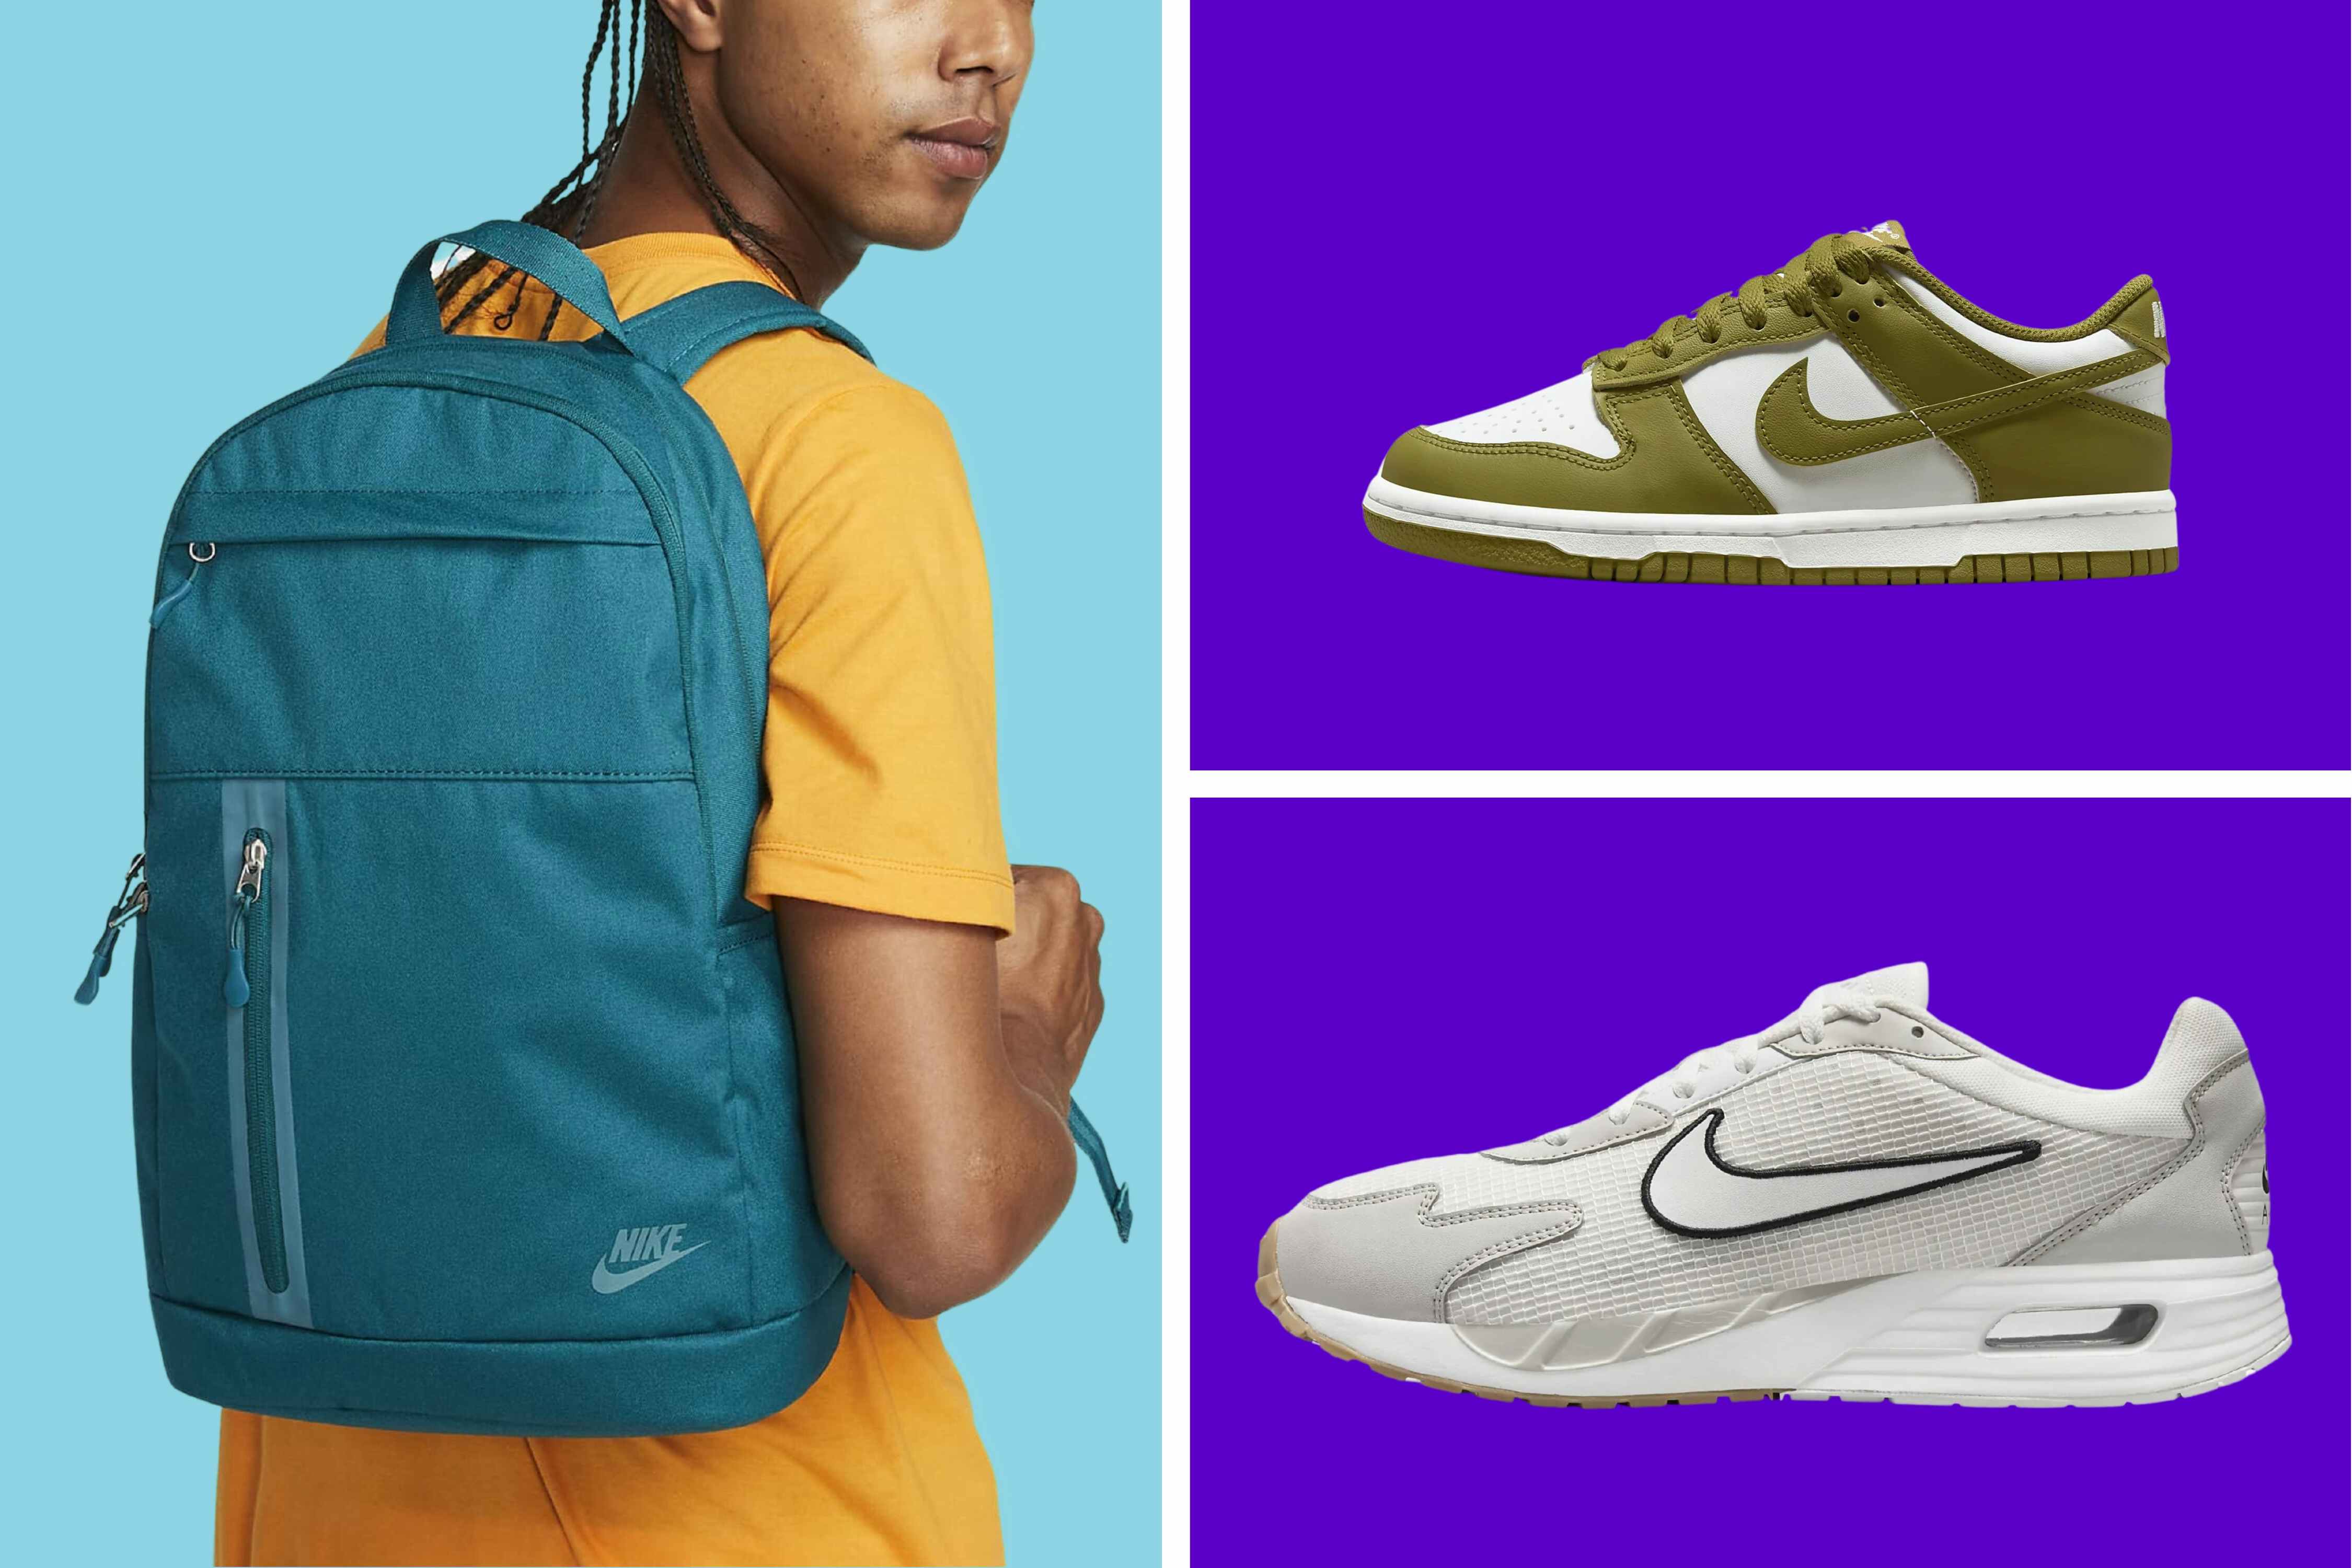 Nike Back-to-School Sale: $22 Backpack, $32 Sneakers, $58 Dunks, and More